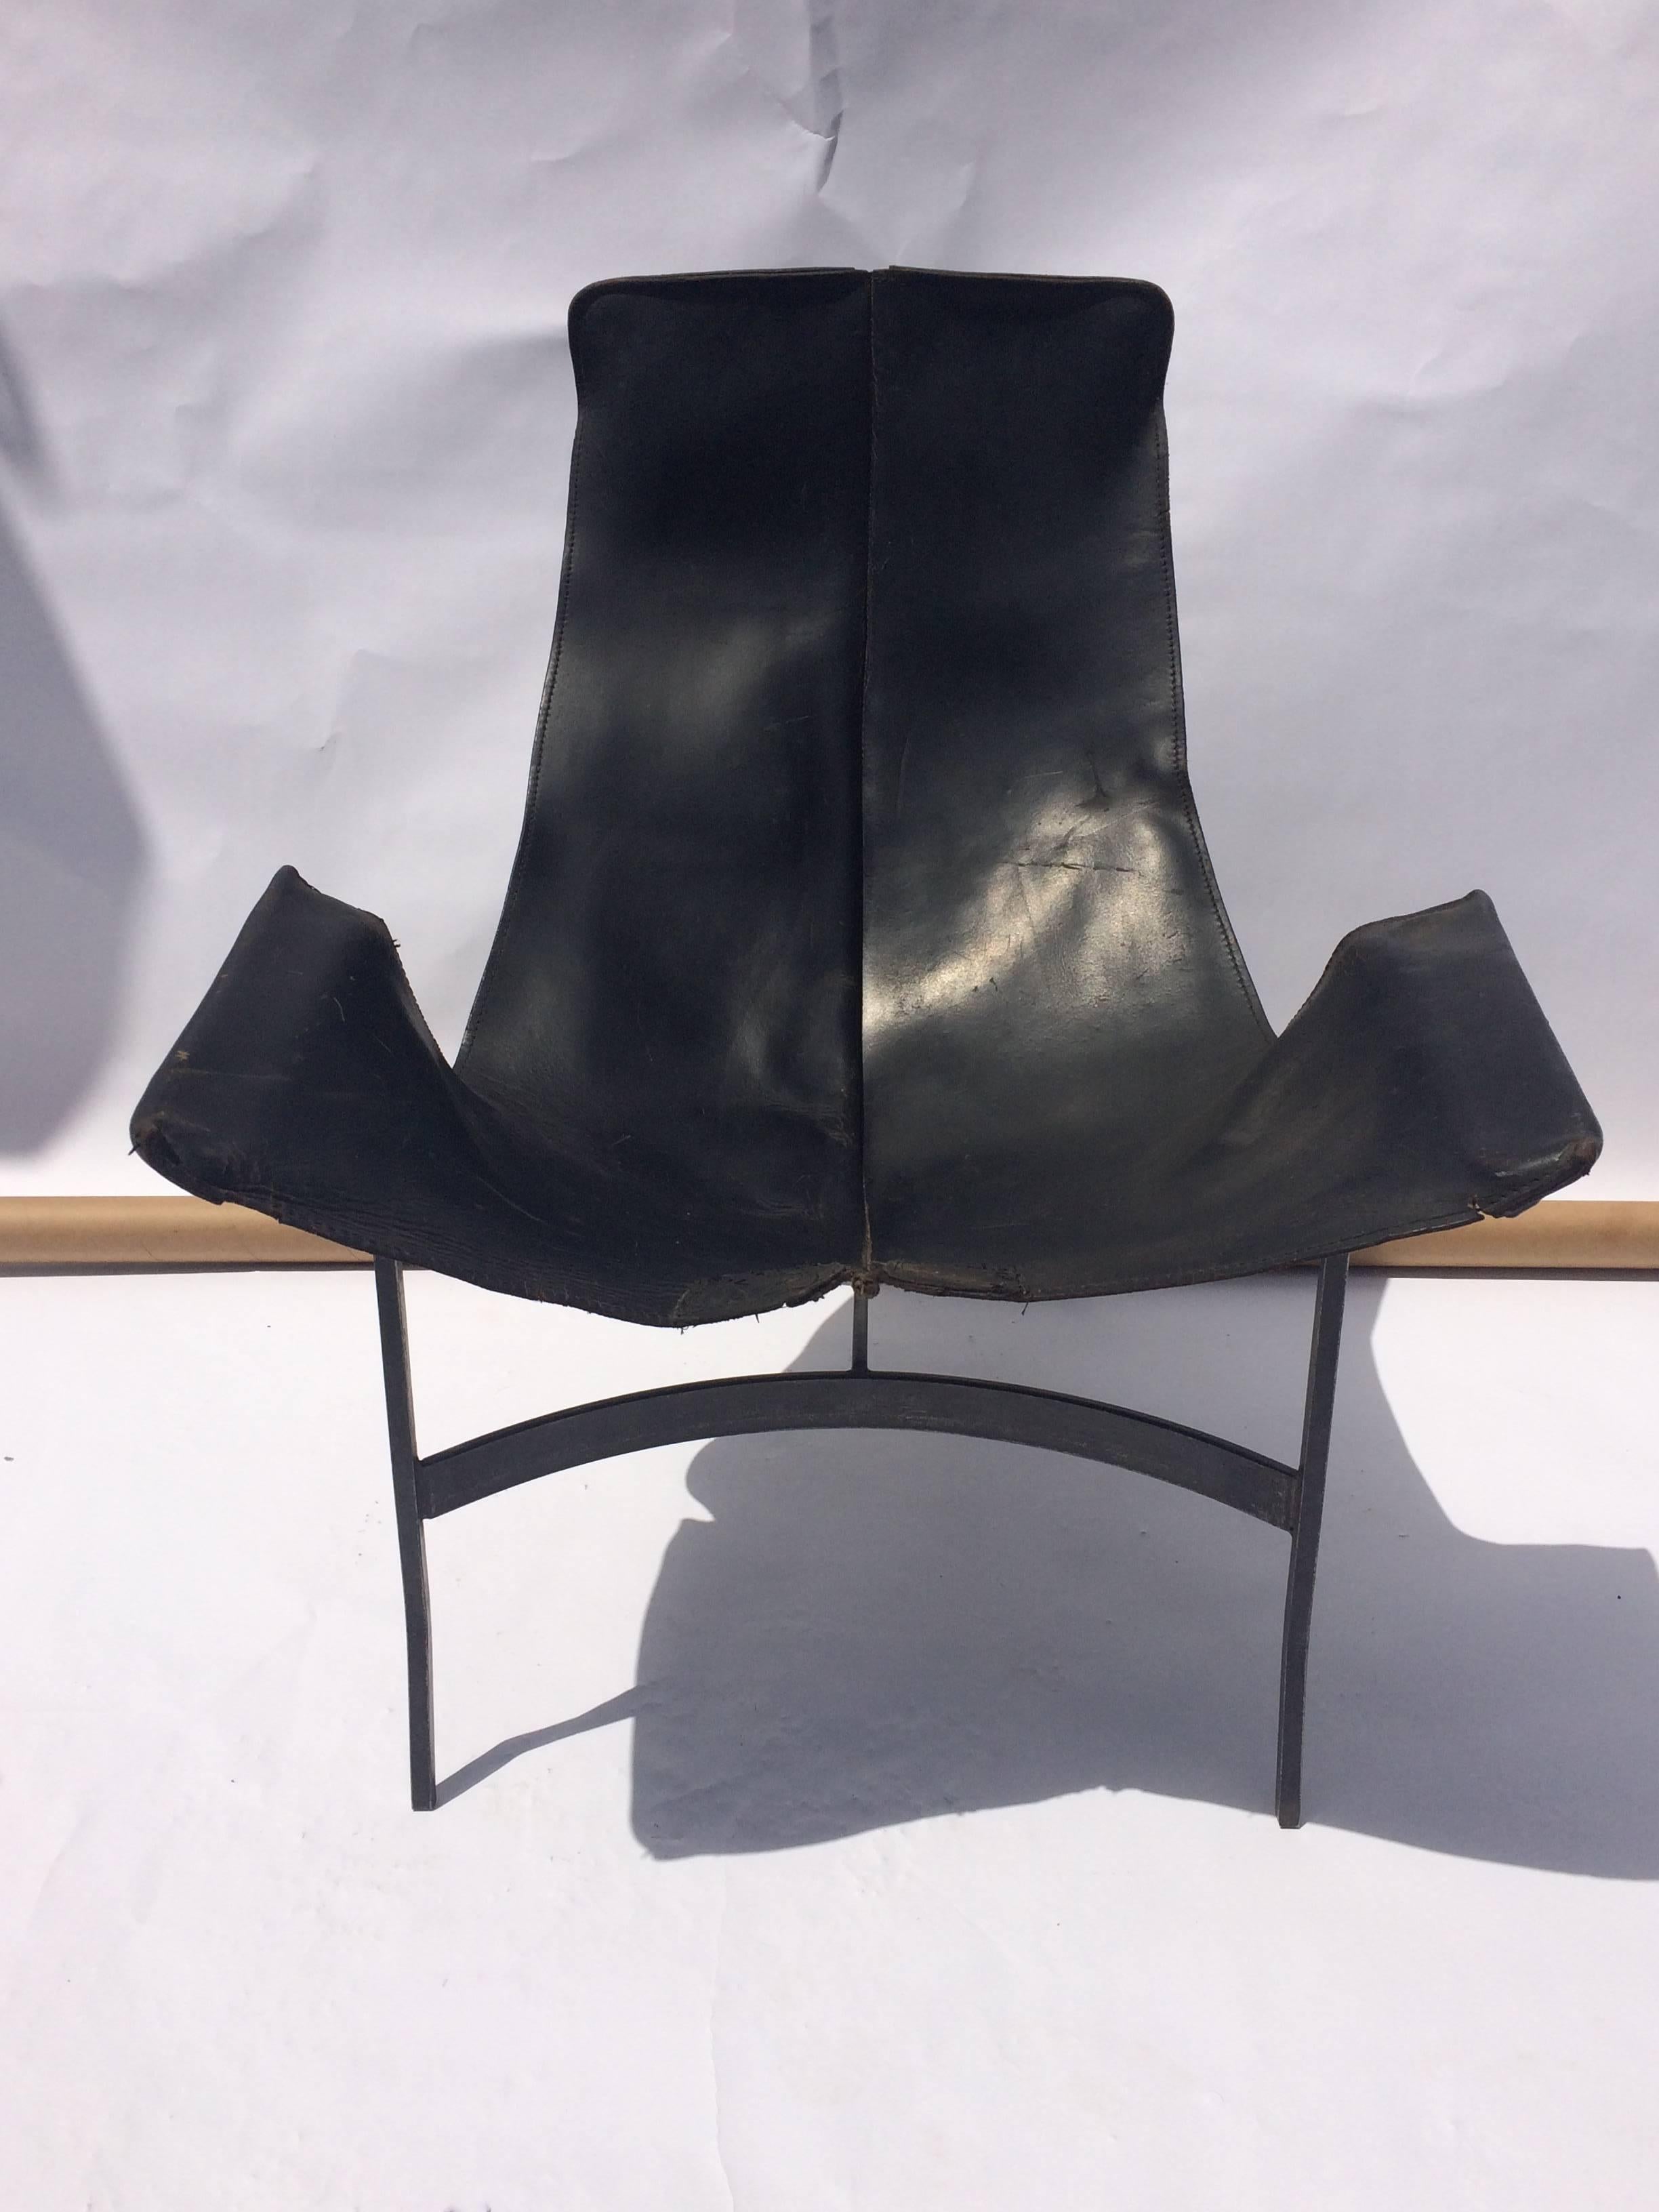 Beautifully distressed leather sling chair by William Katavolos for Leathercrafter. Maintaining its original black leather sling with wonderful repairing.